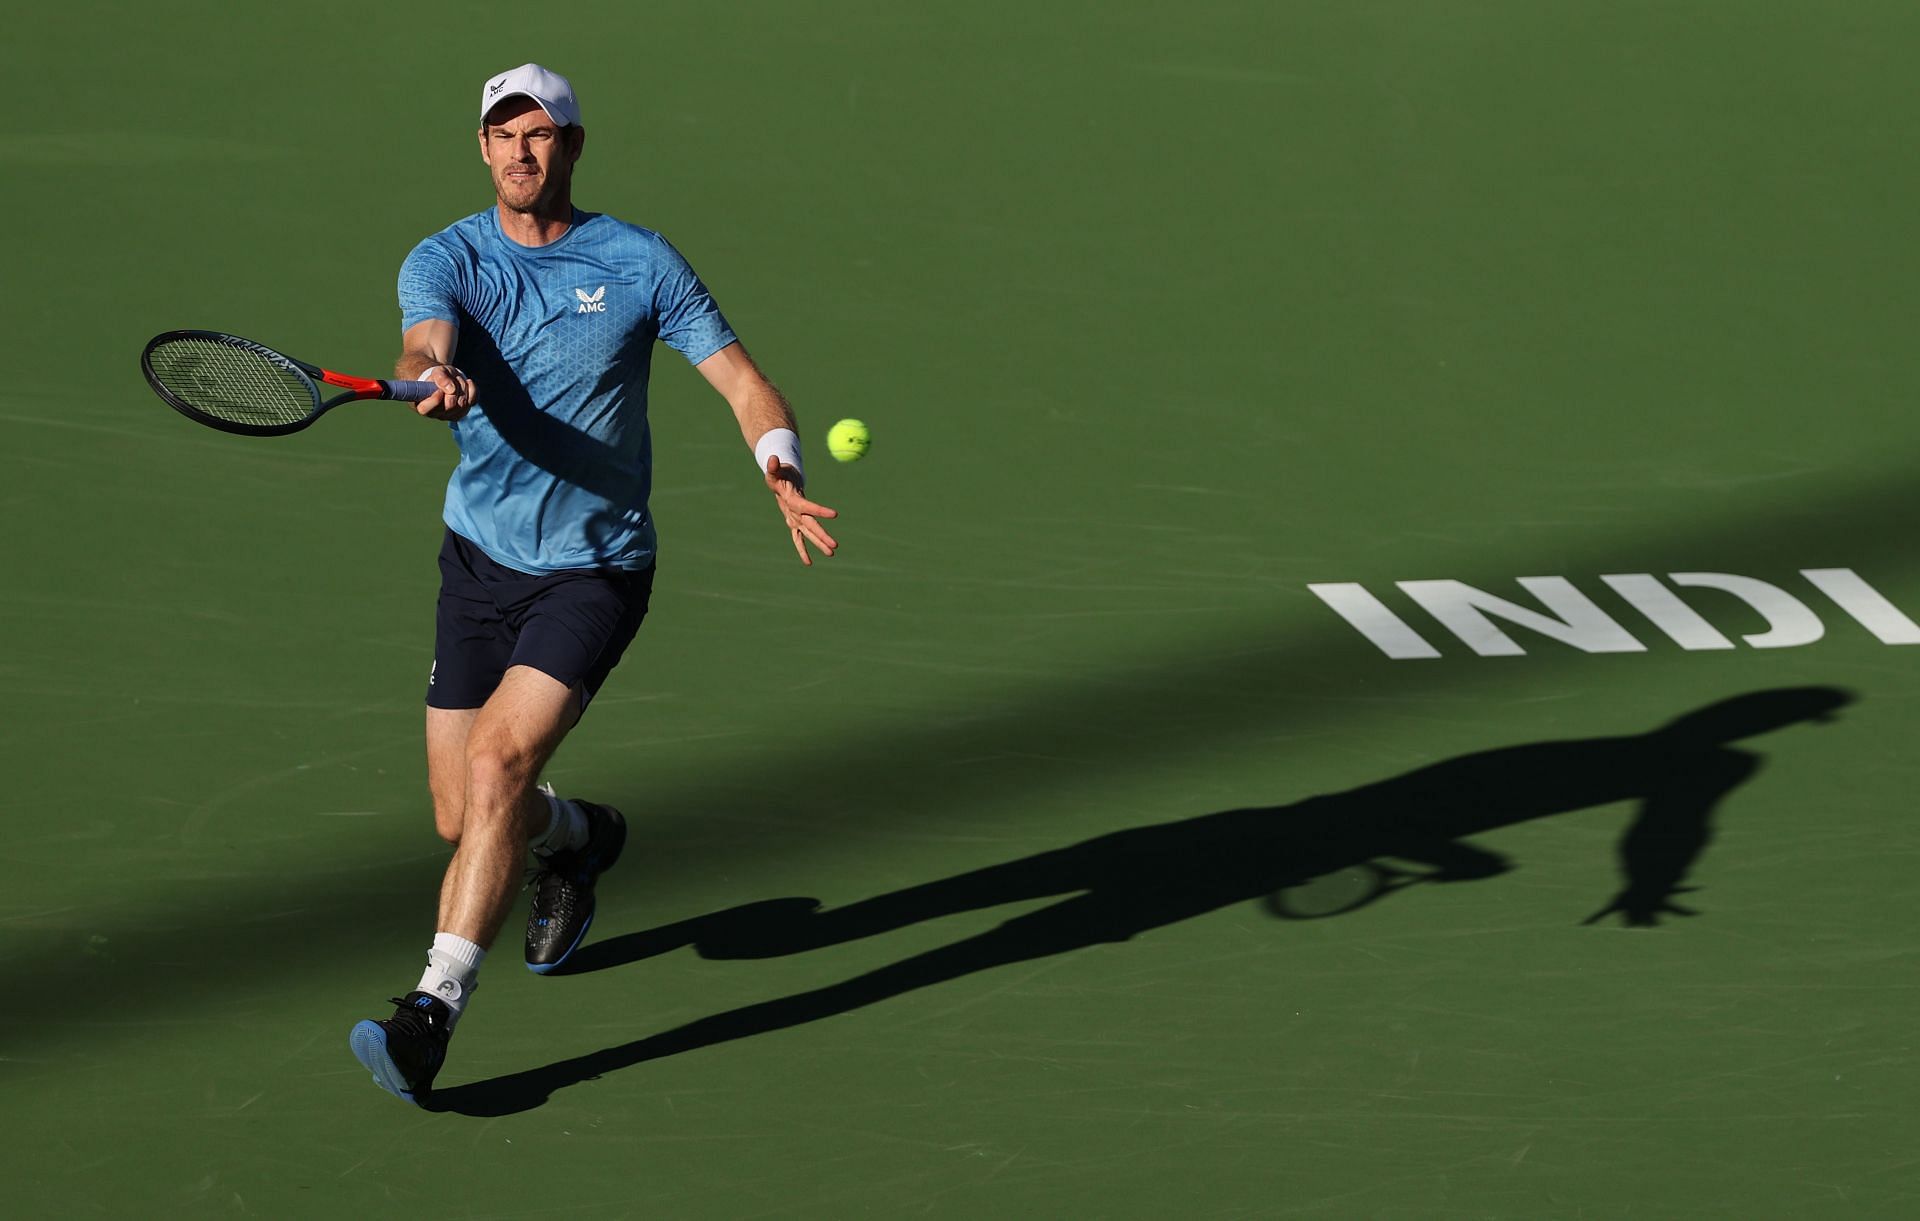 Andy Murray at the 2021 BNP Paribas Open in Indian Wells